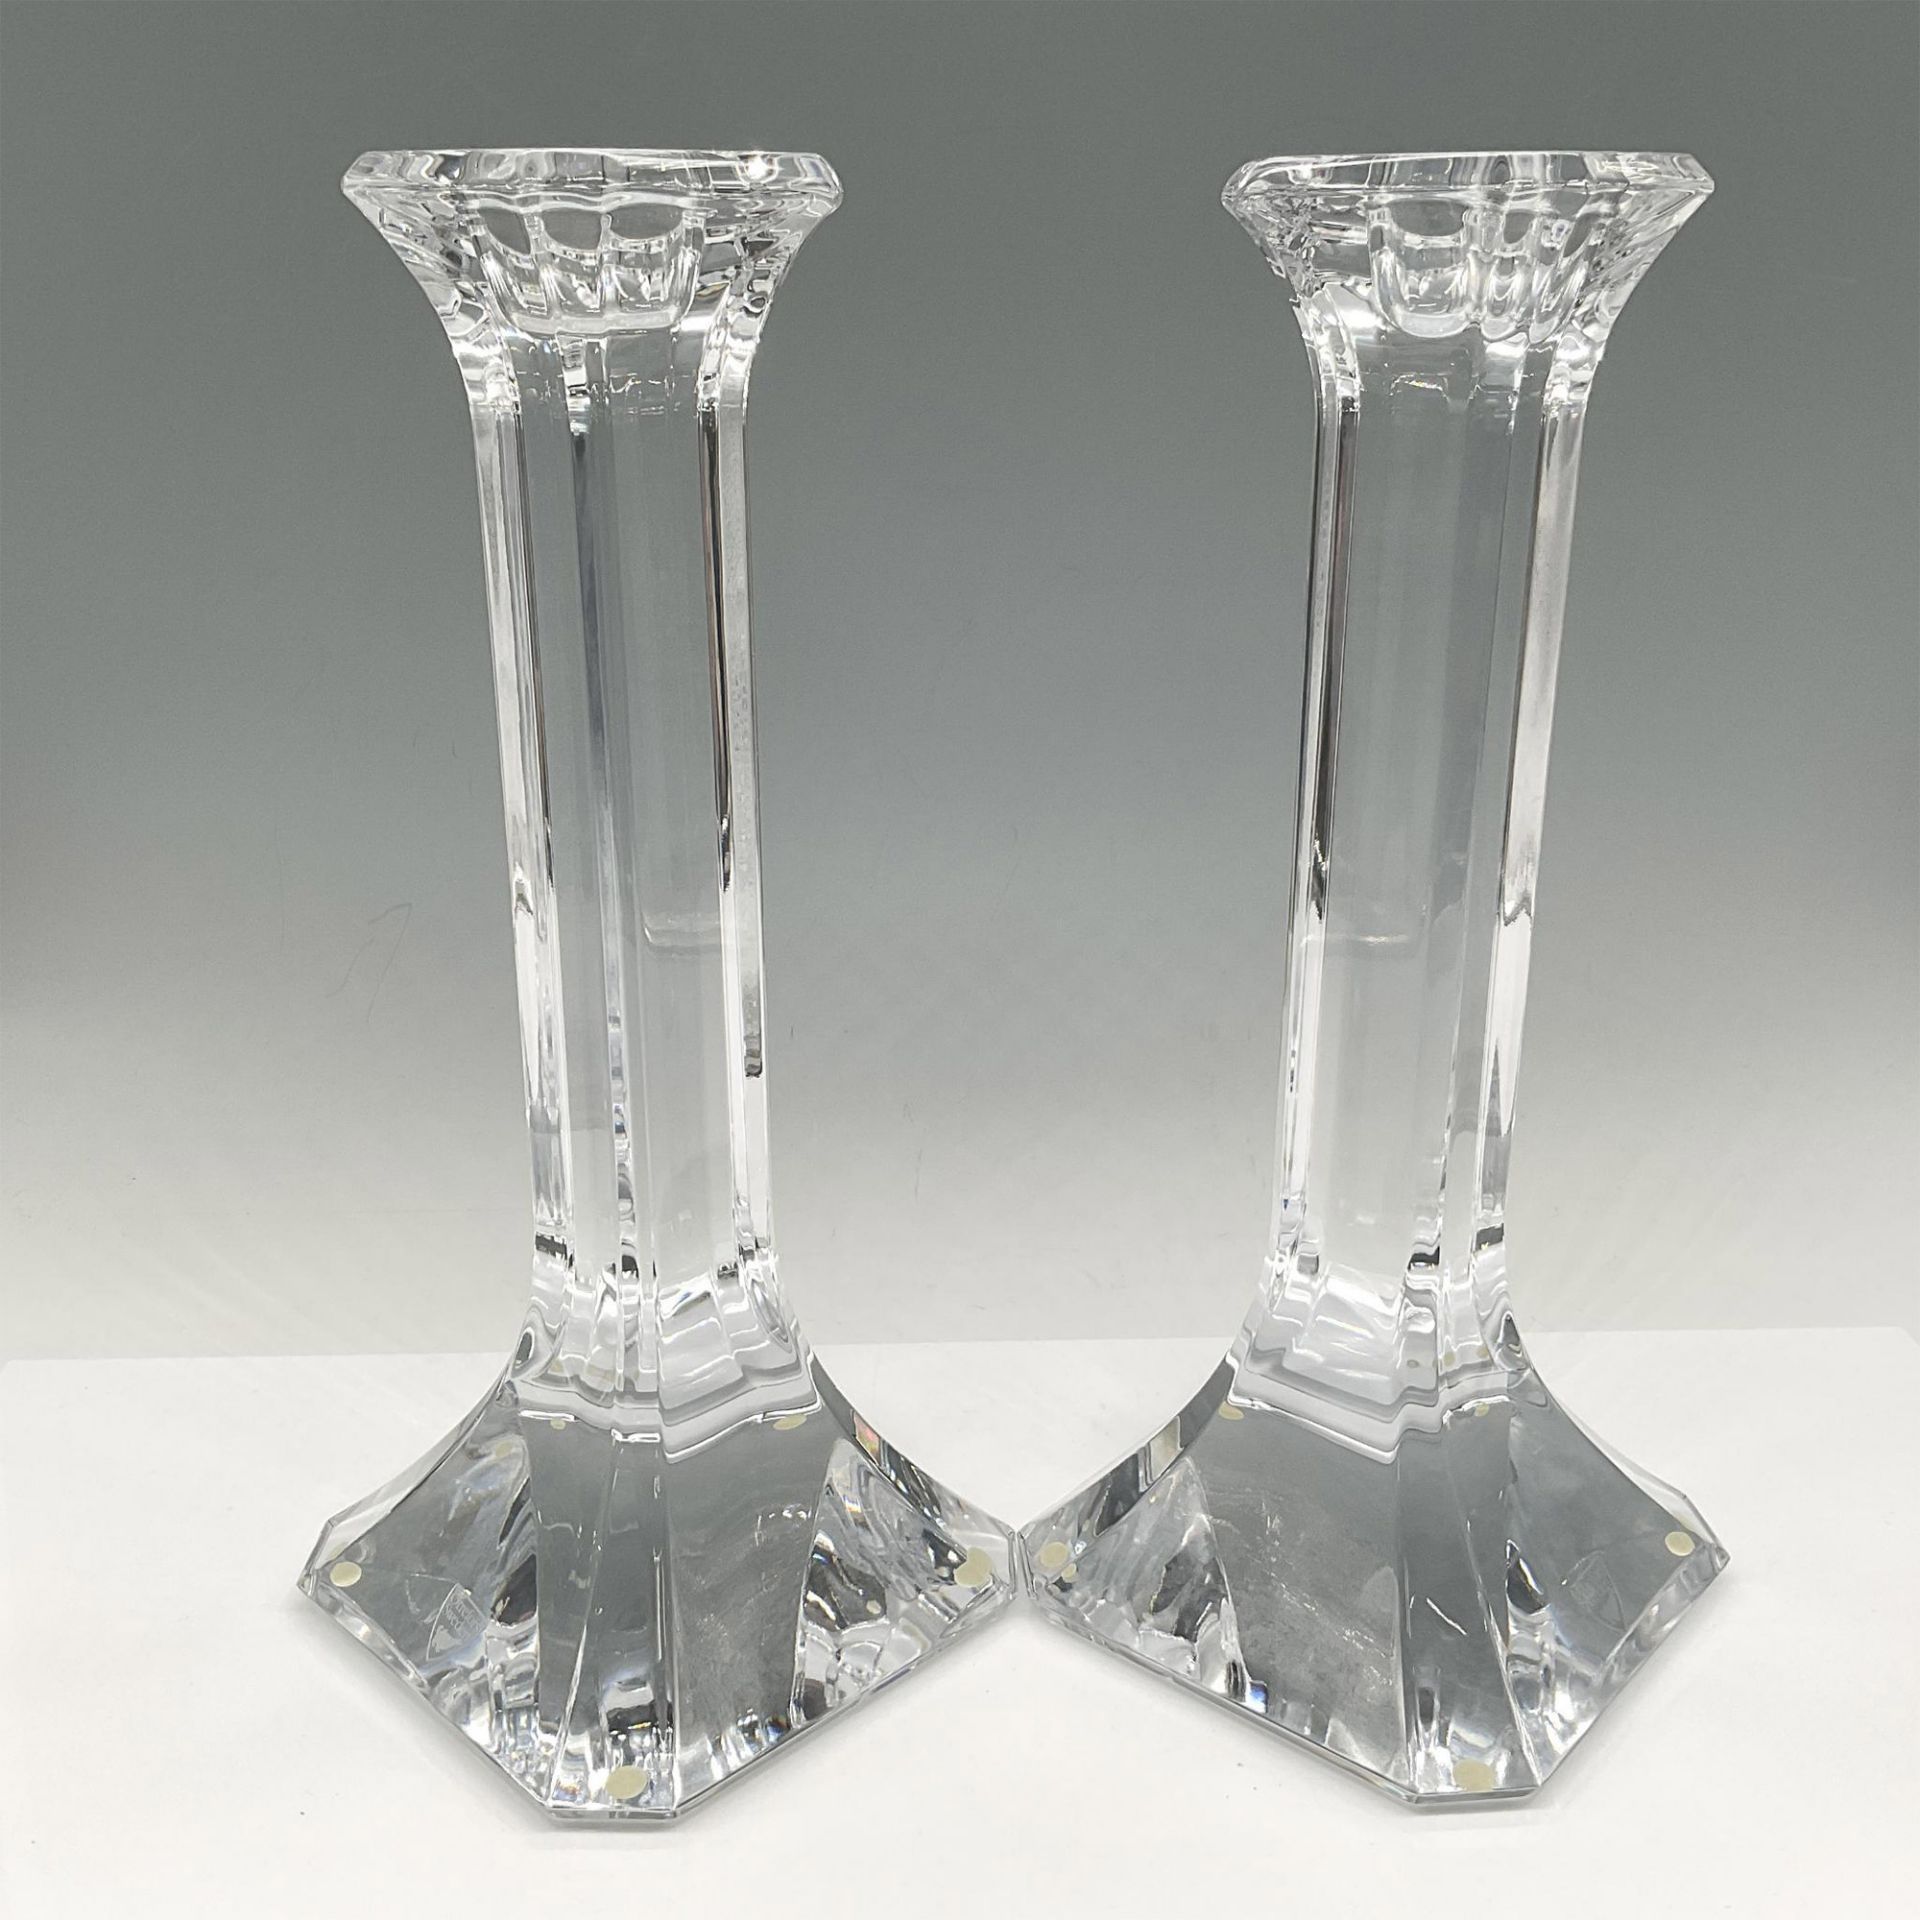 Pair of Orrefors Crystal Candle Holders - Image 2 of 4